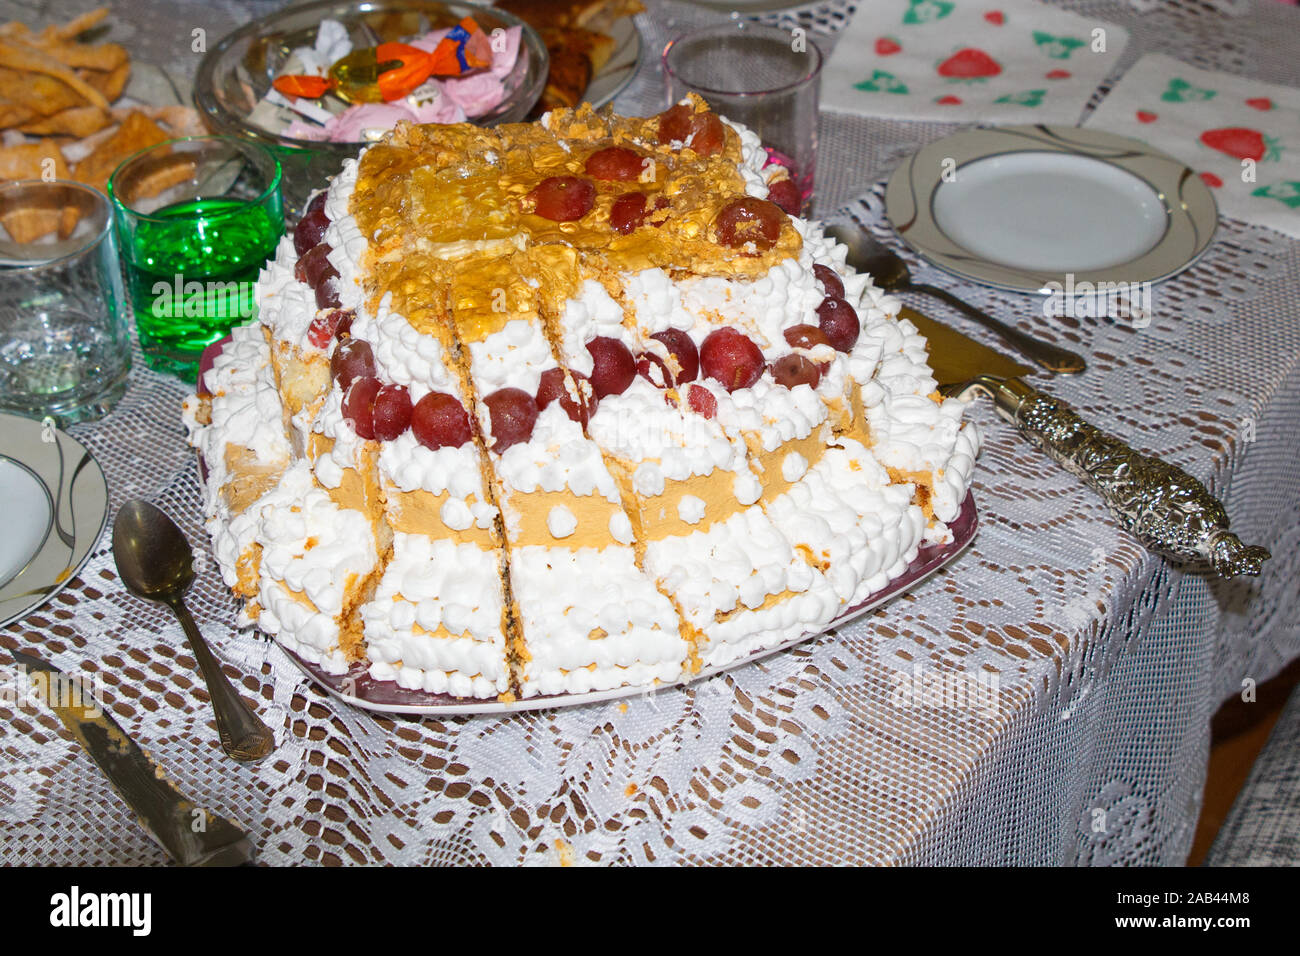 Birthday party cake with fruit on table. Cut cake. Stock Photo